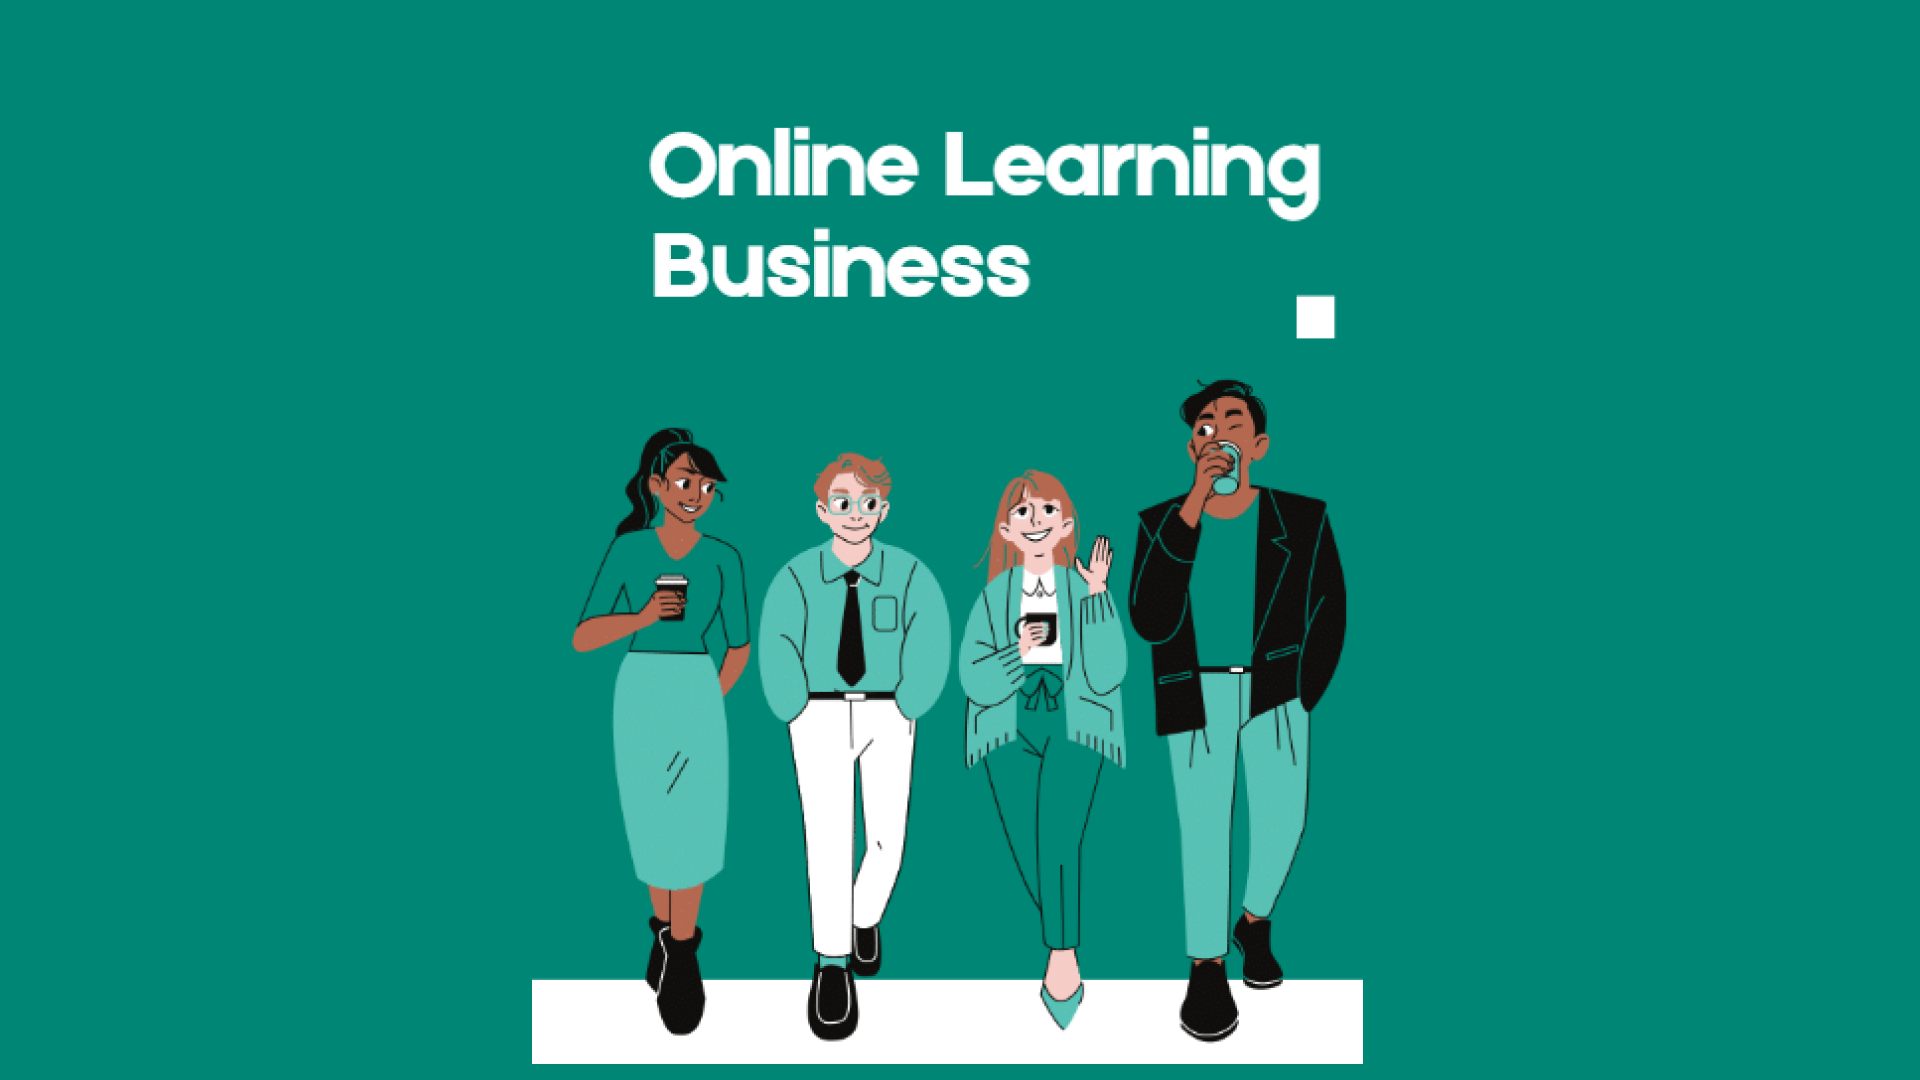 How to Start Online Learning Business